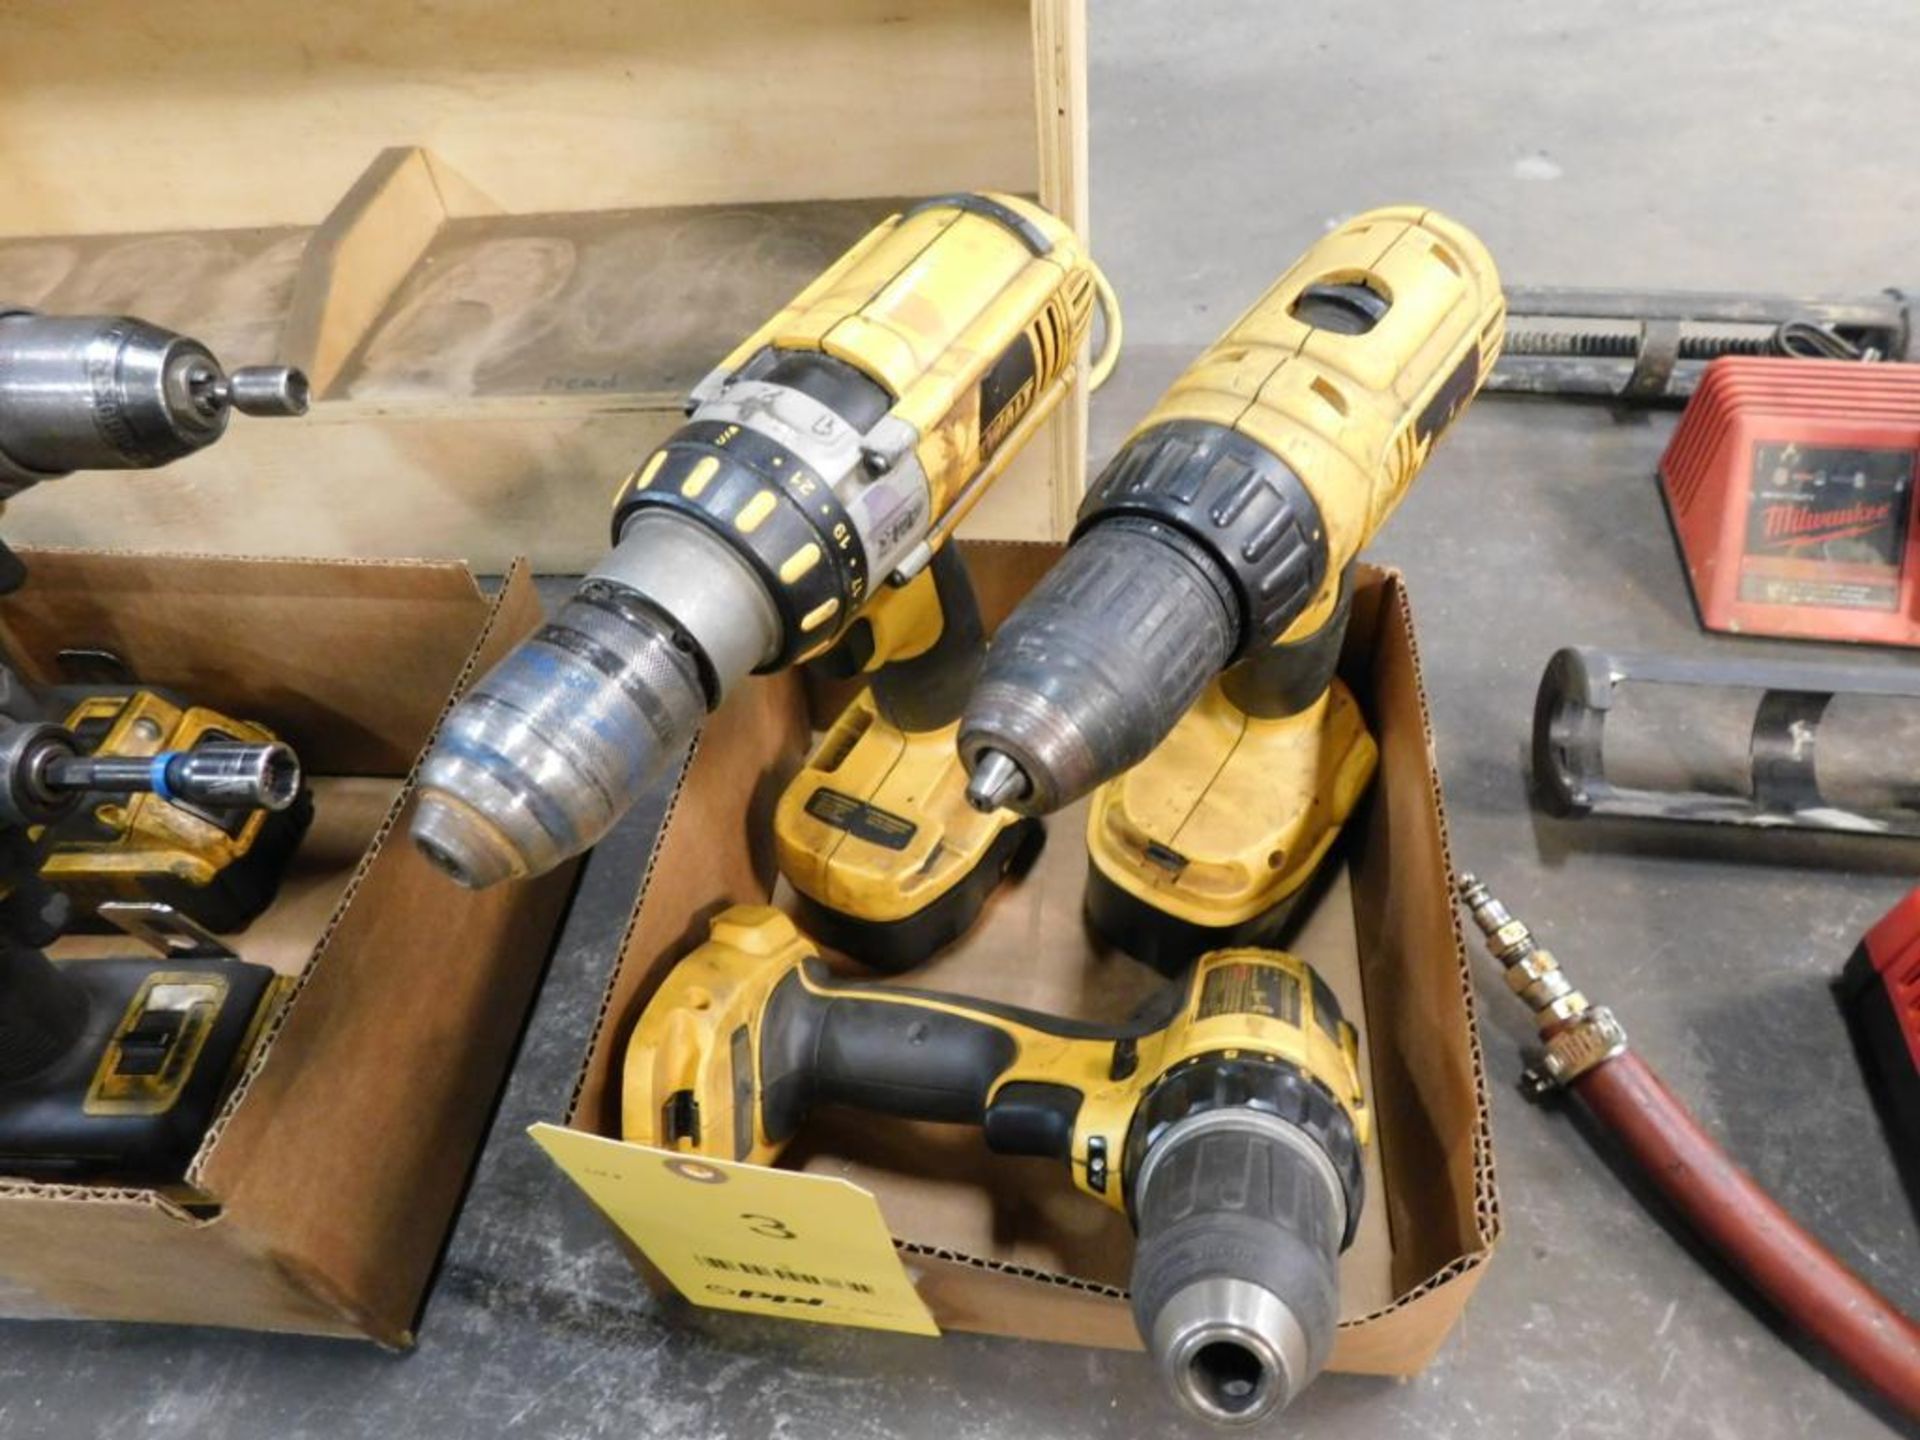 LOT: (1) Dewalt XRP 1/2 in. Cordless Drill/Driver with Battery, (1) Dewalt 1/2 in. Cordless Drill/